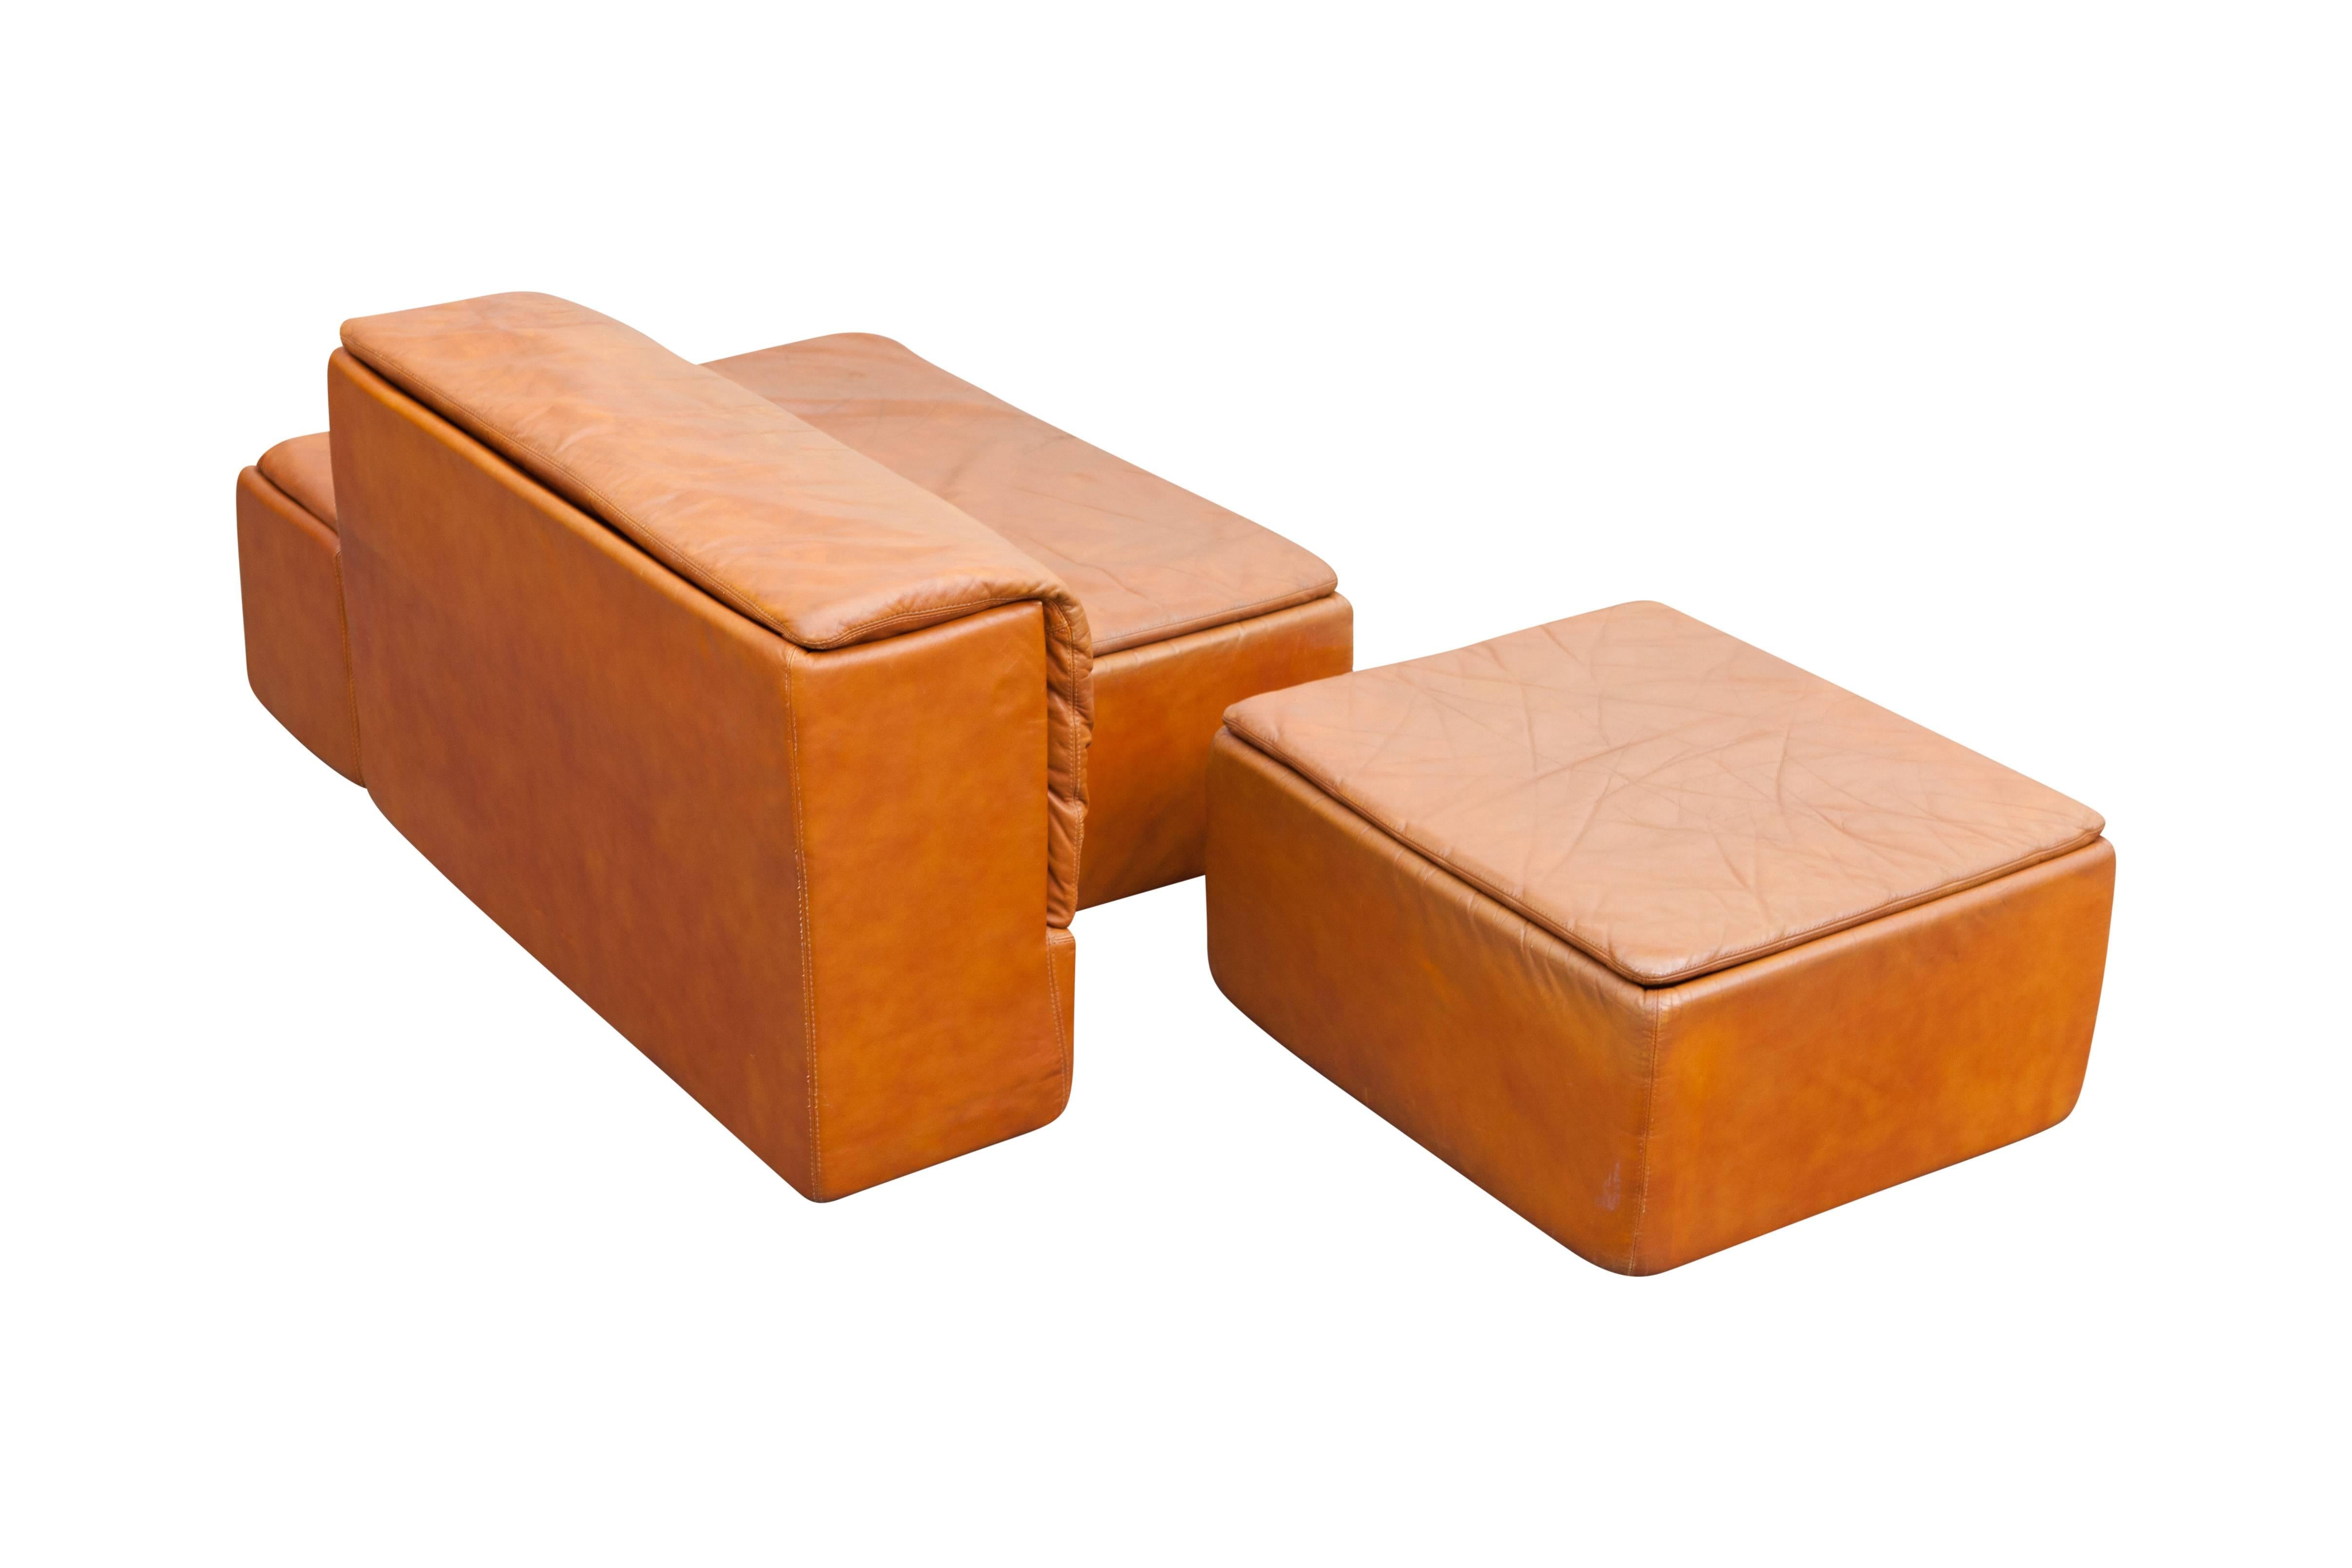 Mid-20th Century Modular Set of “Paione” Leather Sofa’s by Claudio Salocchi for Sormani